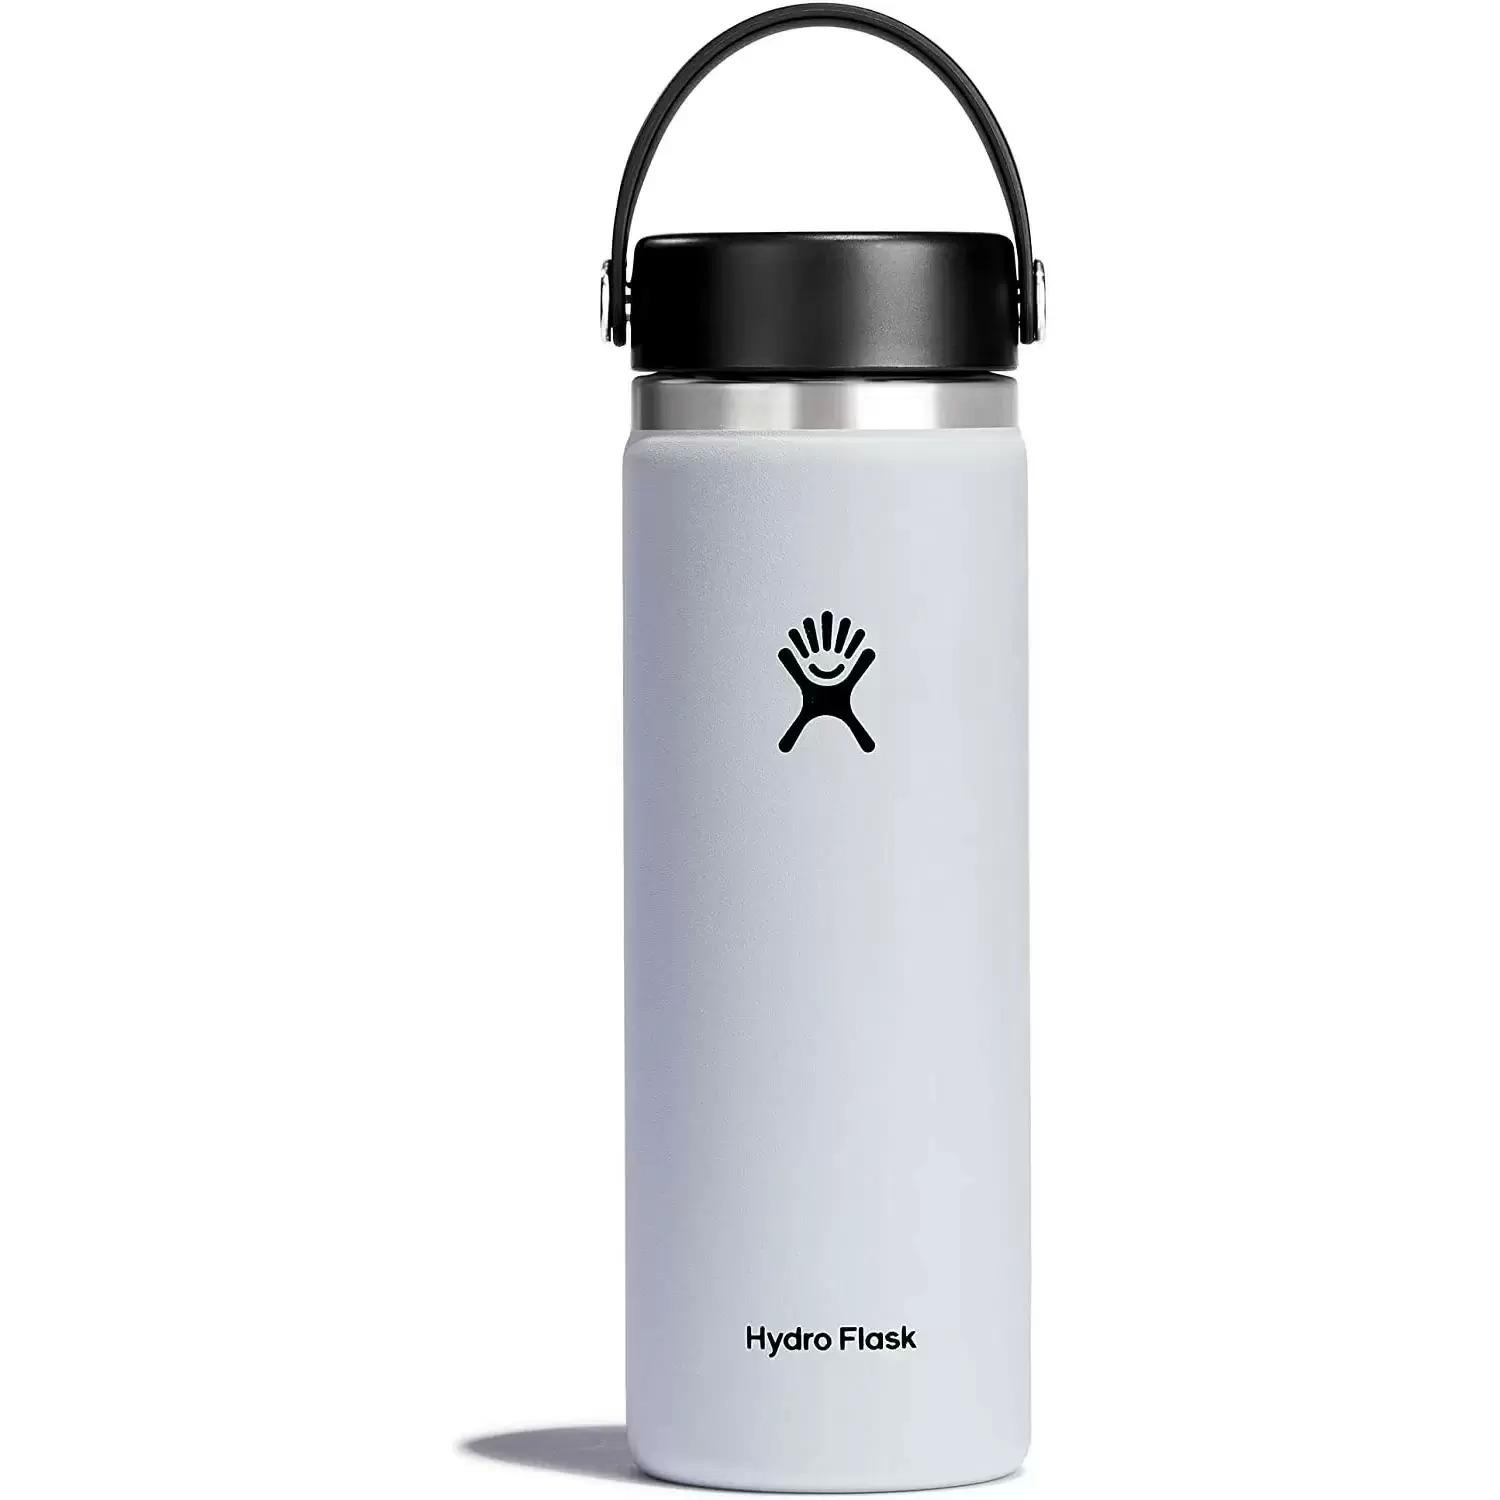 Hydro Flask Wide Mouth Bottle with Flex Cap 20oz for $14.22